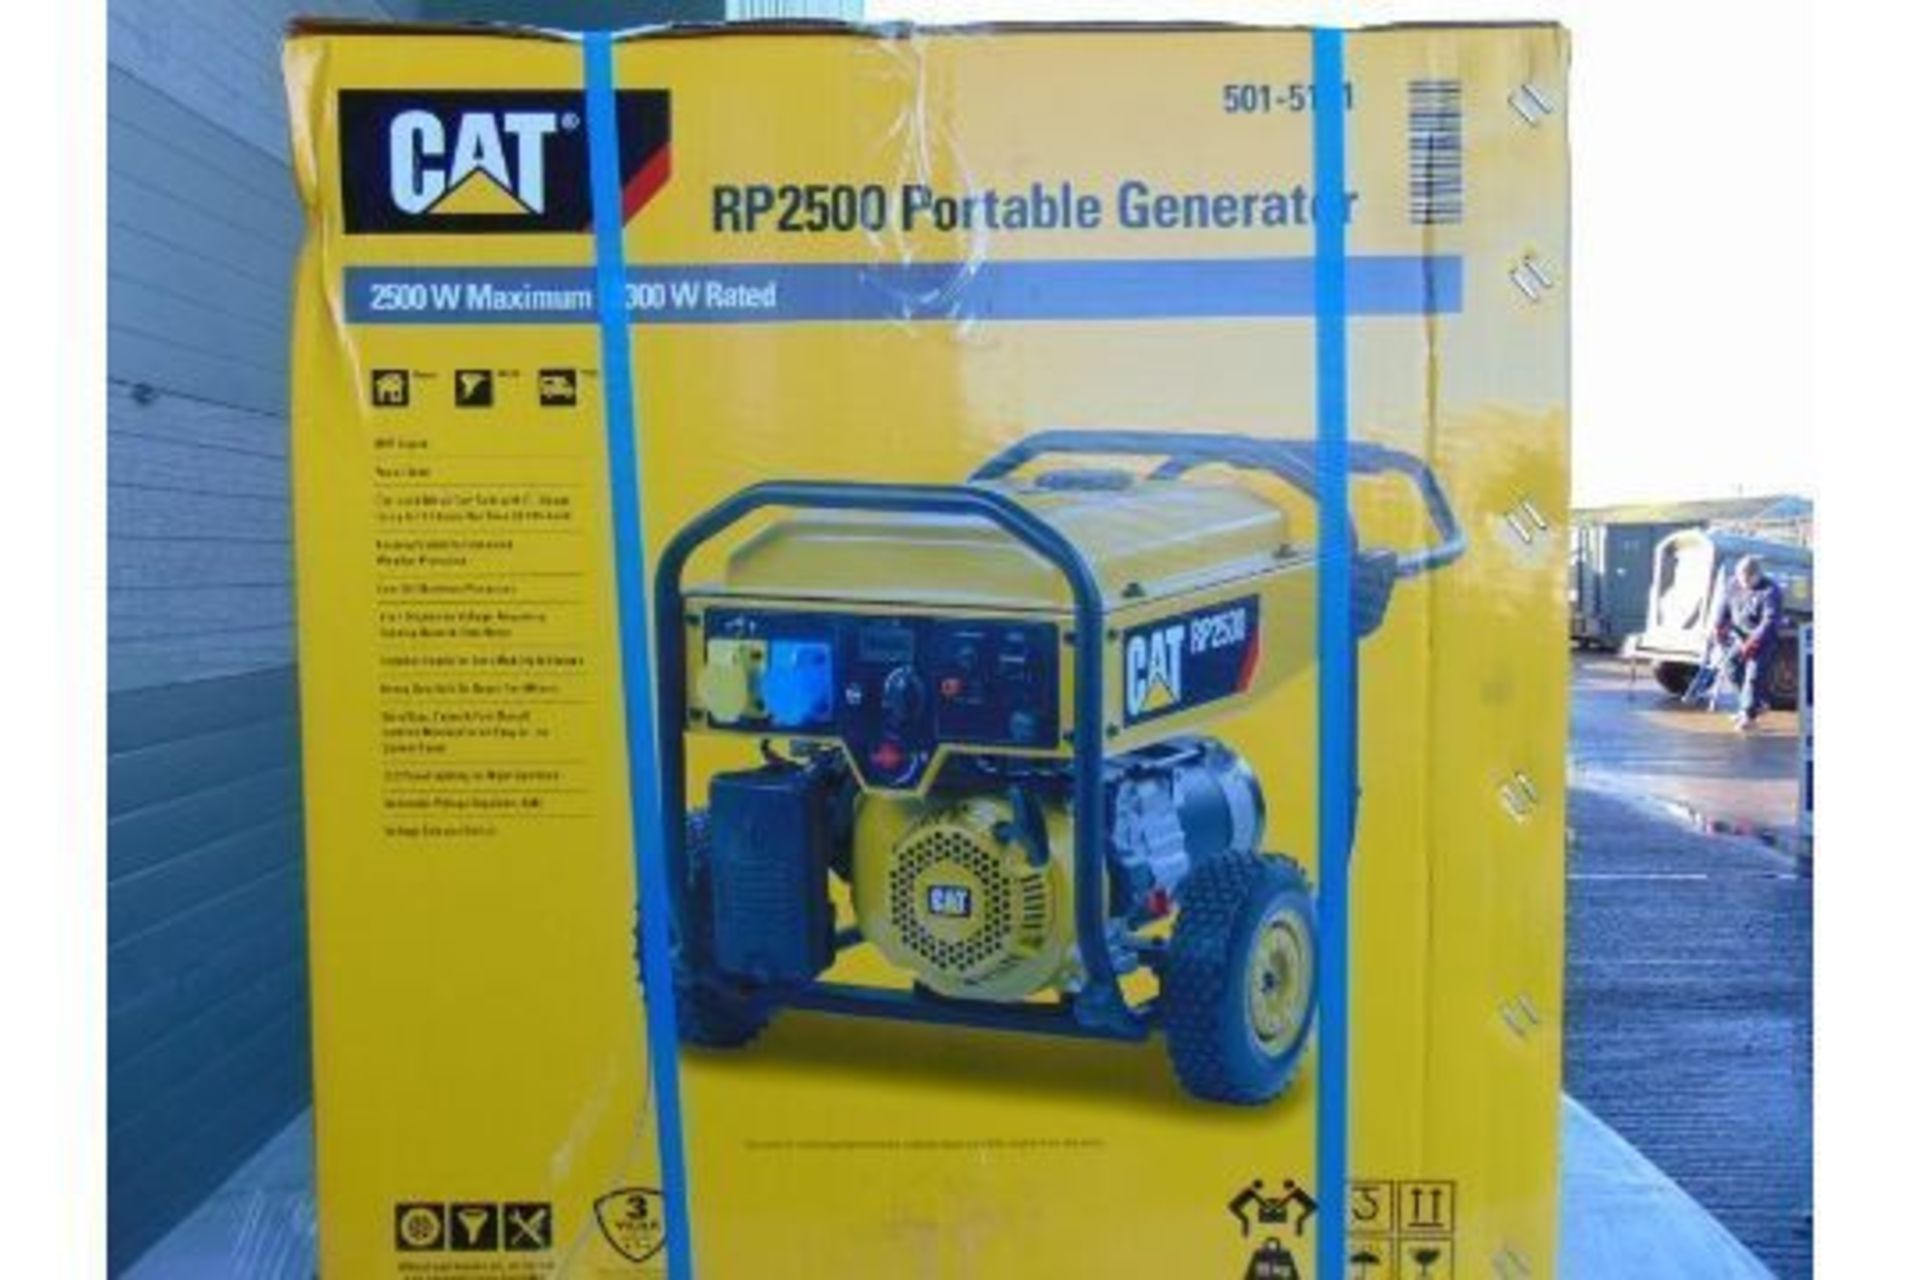 NEW and UNISSUED Caterpillar RP2500 (3.1 KVA) Industrial Petrol Generator Set - Image 2 of 5